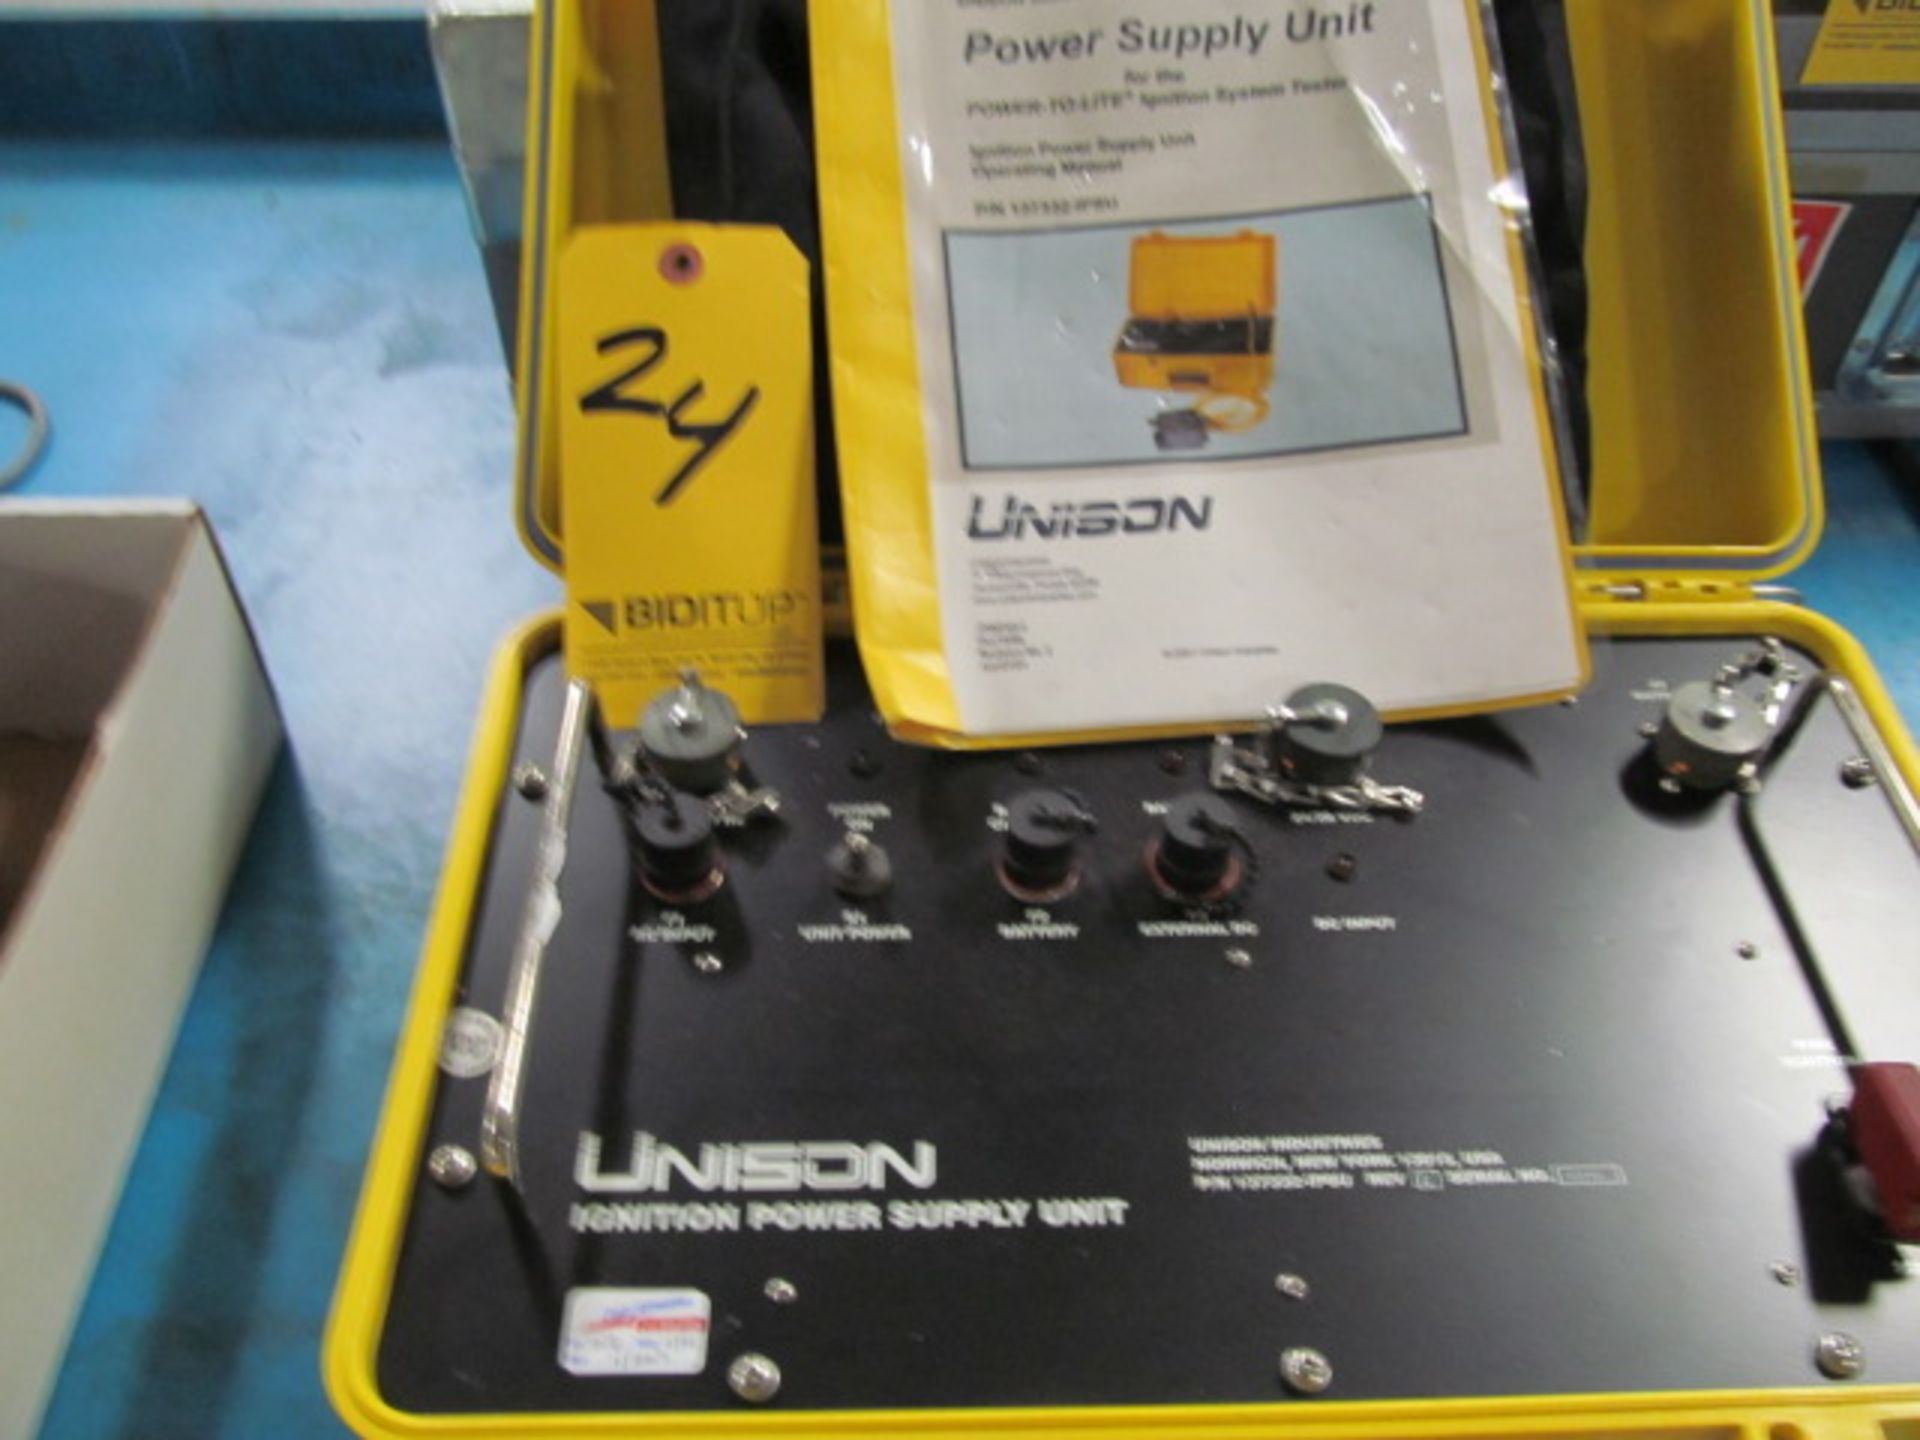 Unison Ignition Power Supply Unit, S/N 0016